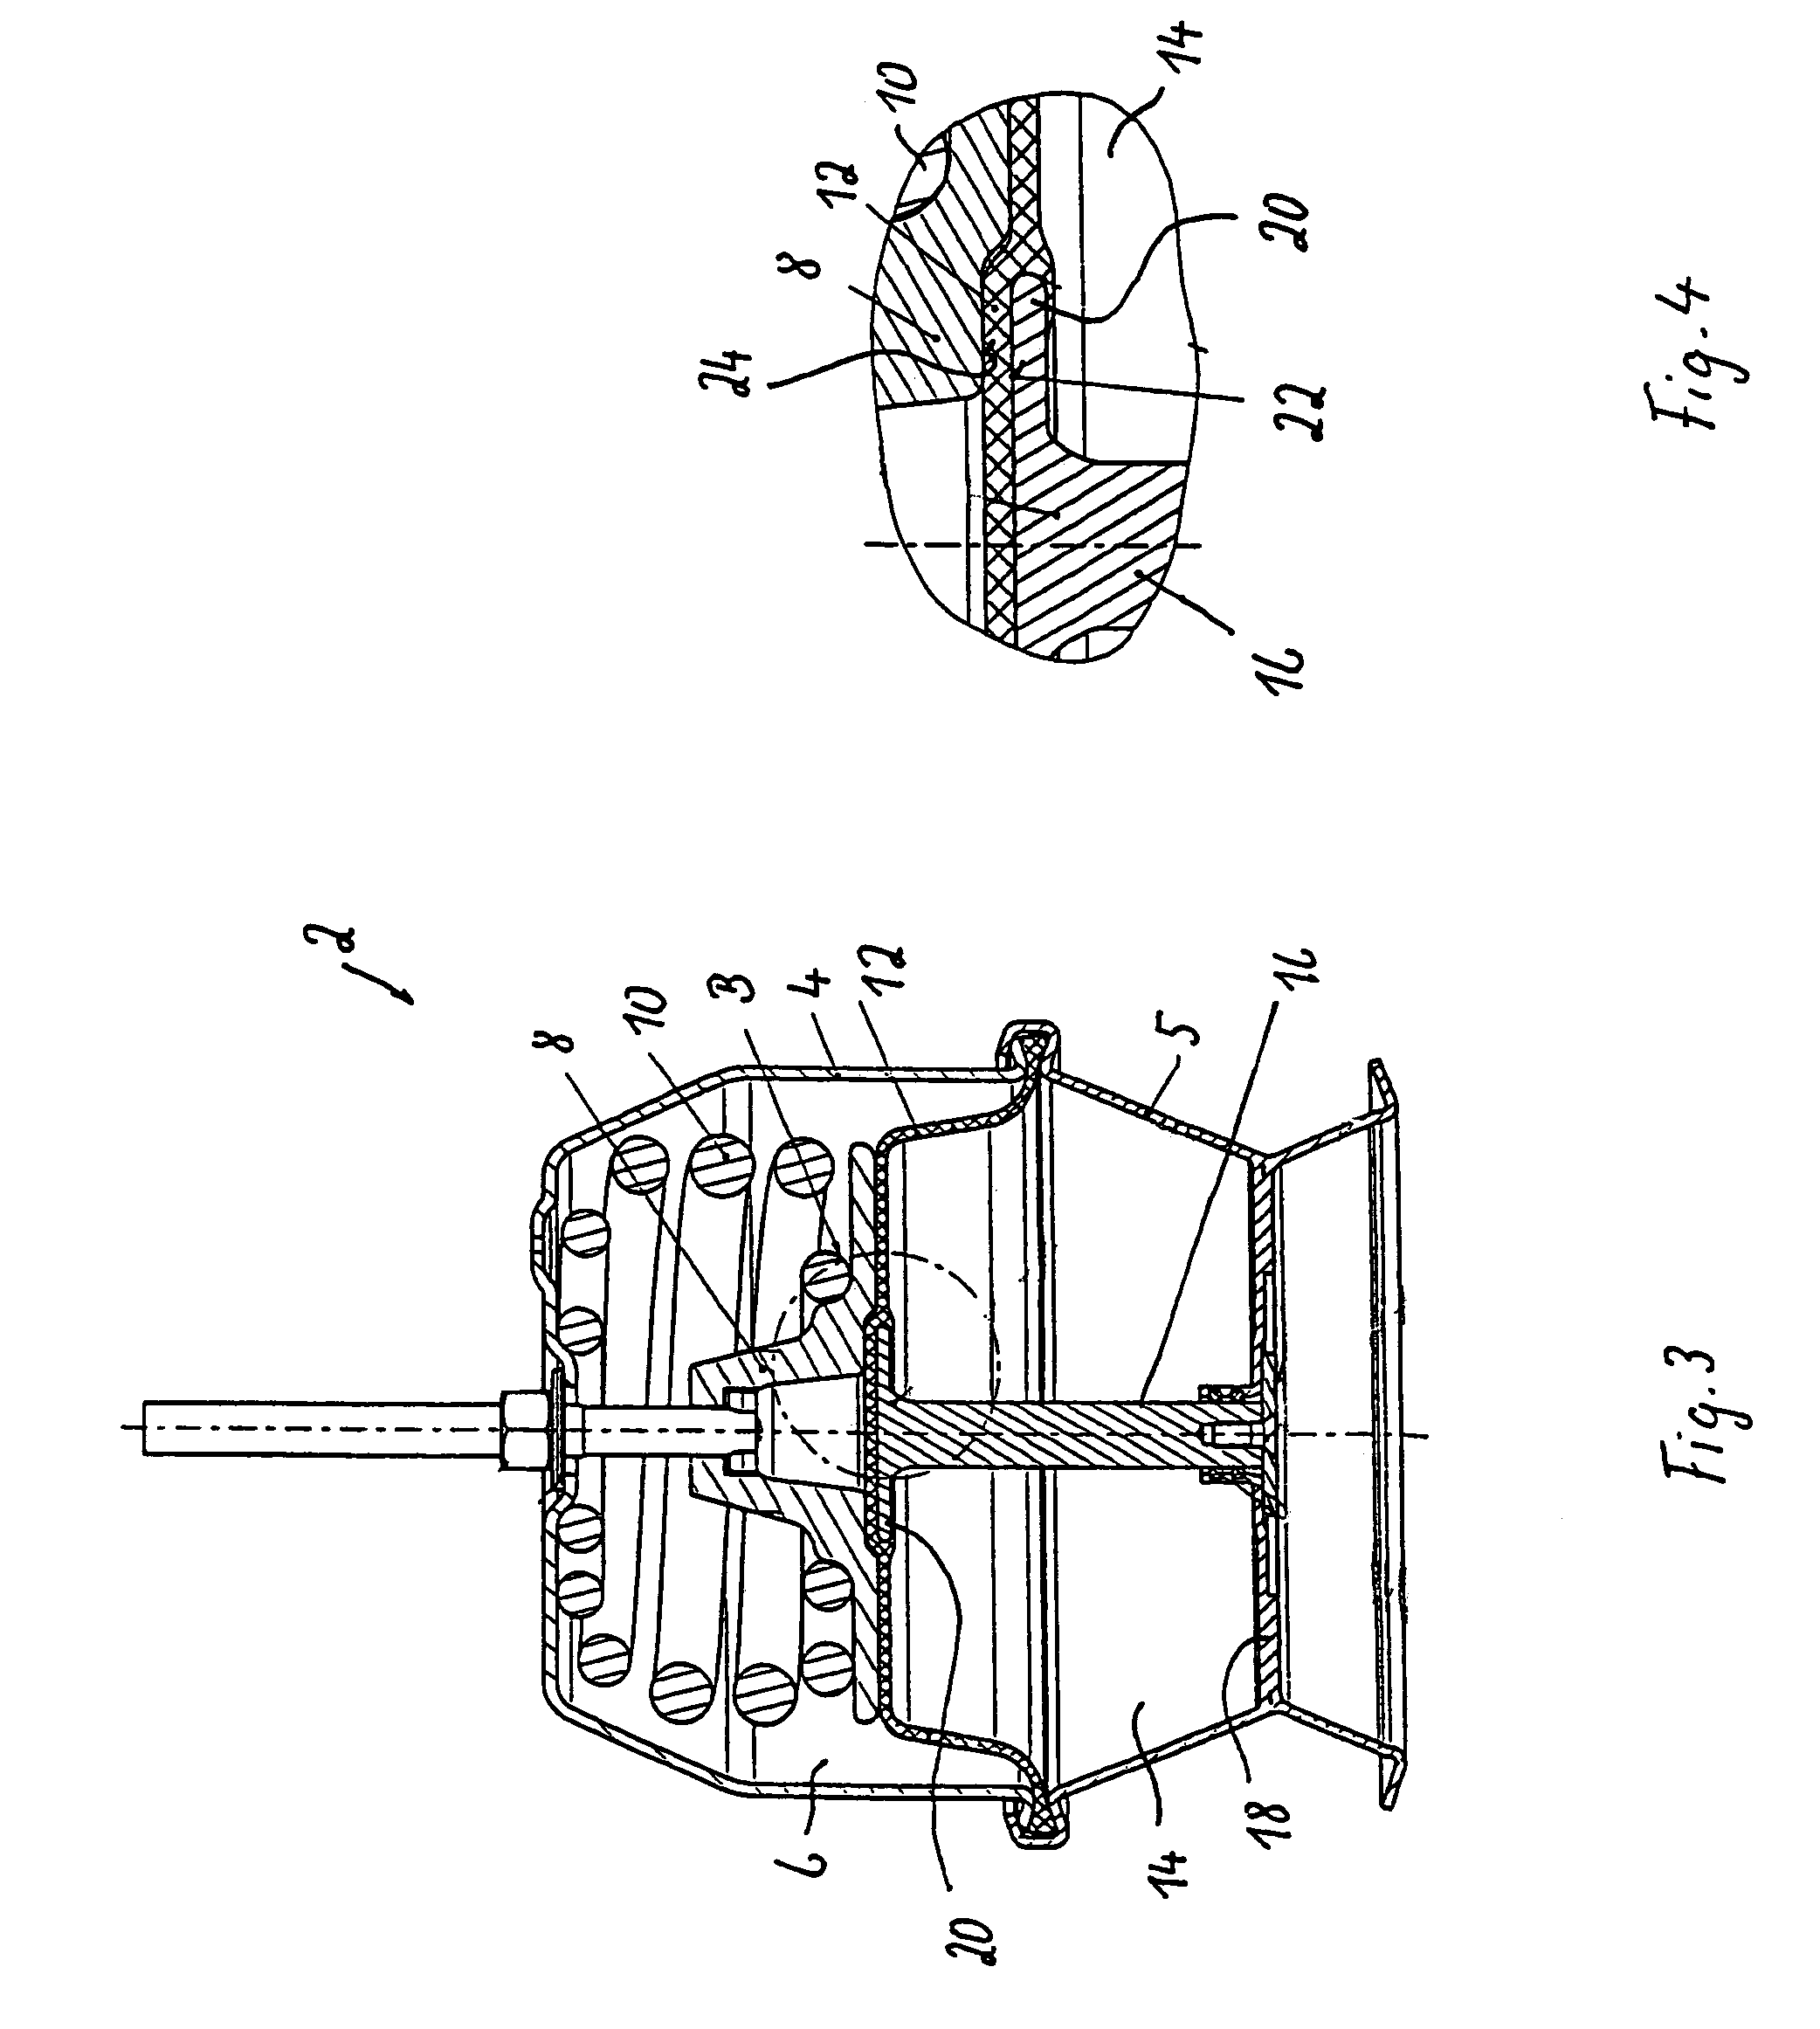 Spring-actuated air-brake cylinder for vehicle brake systems